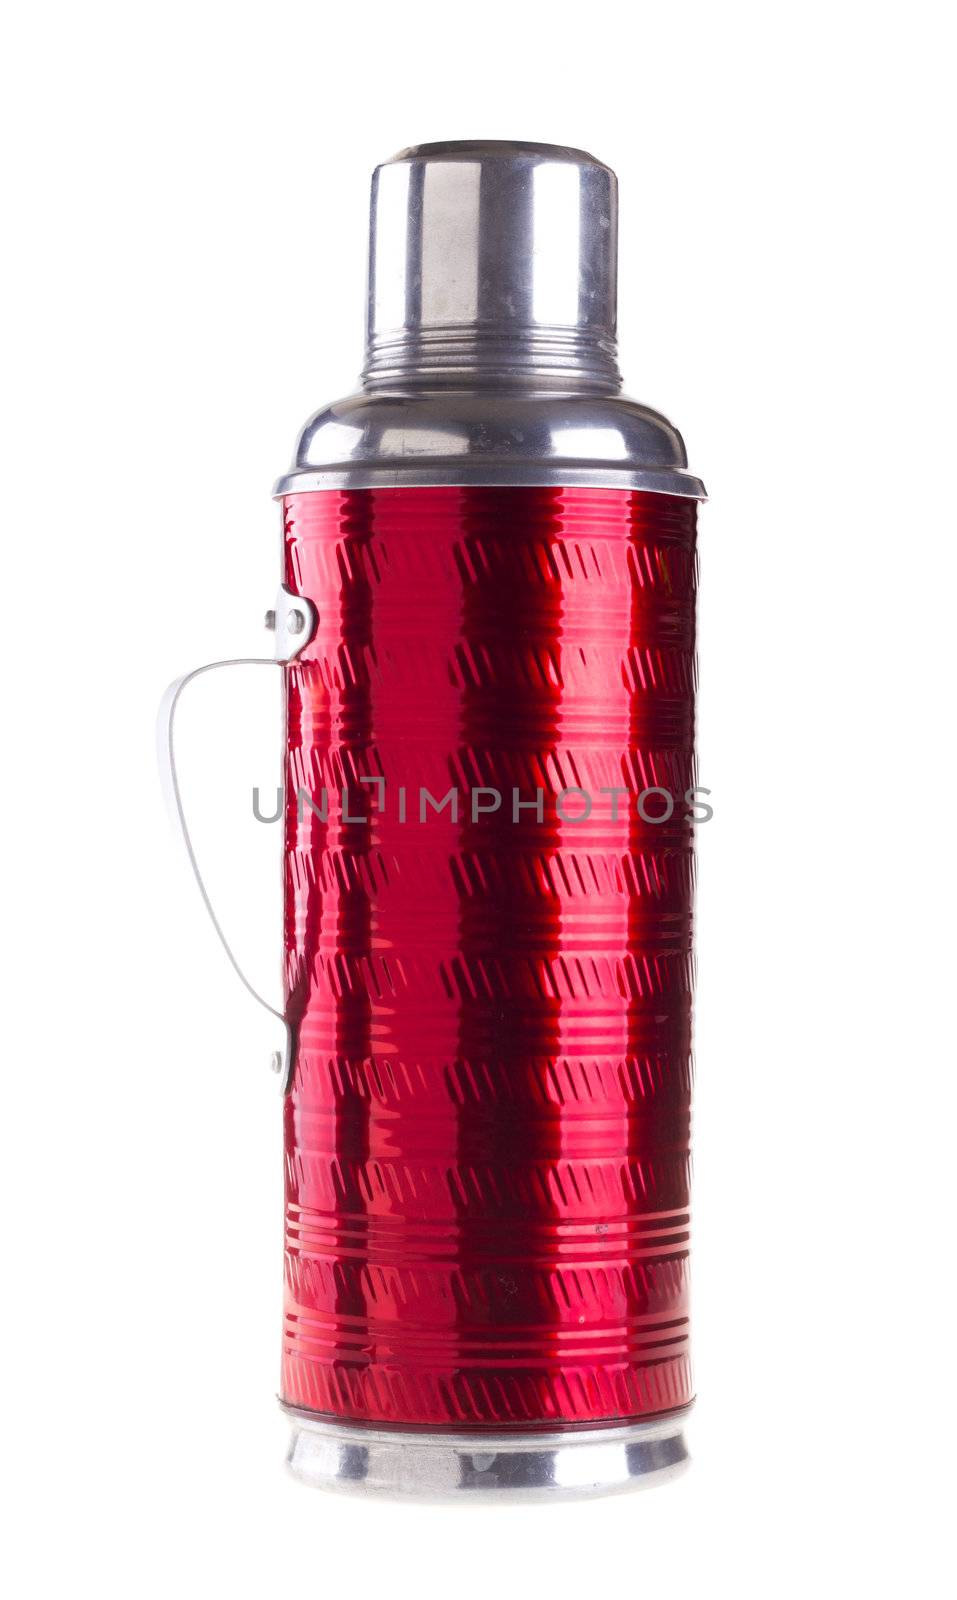 Thermo flask by tehcheesiong